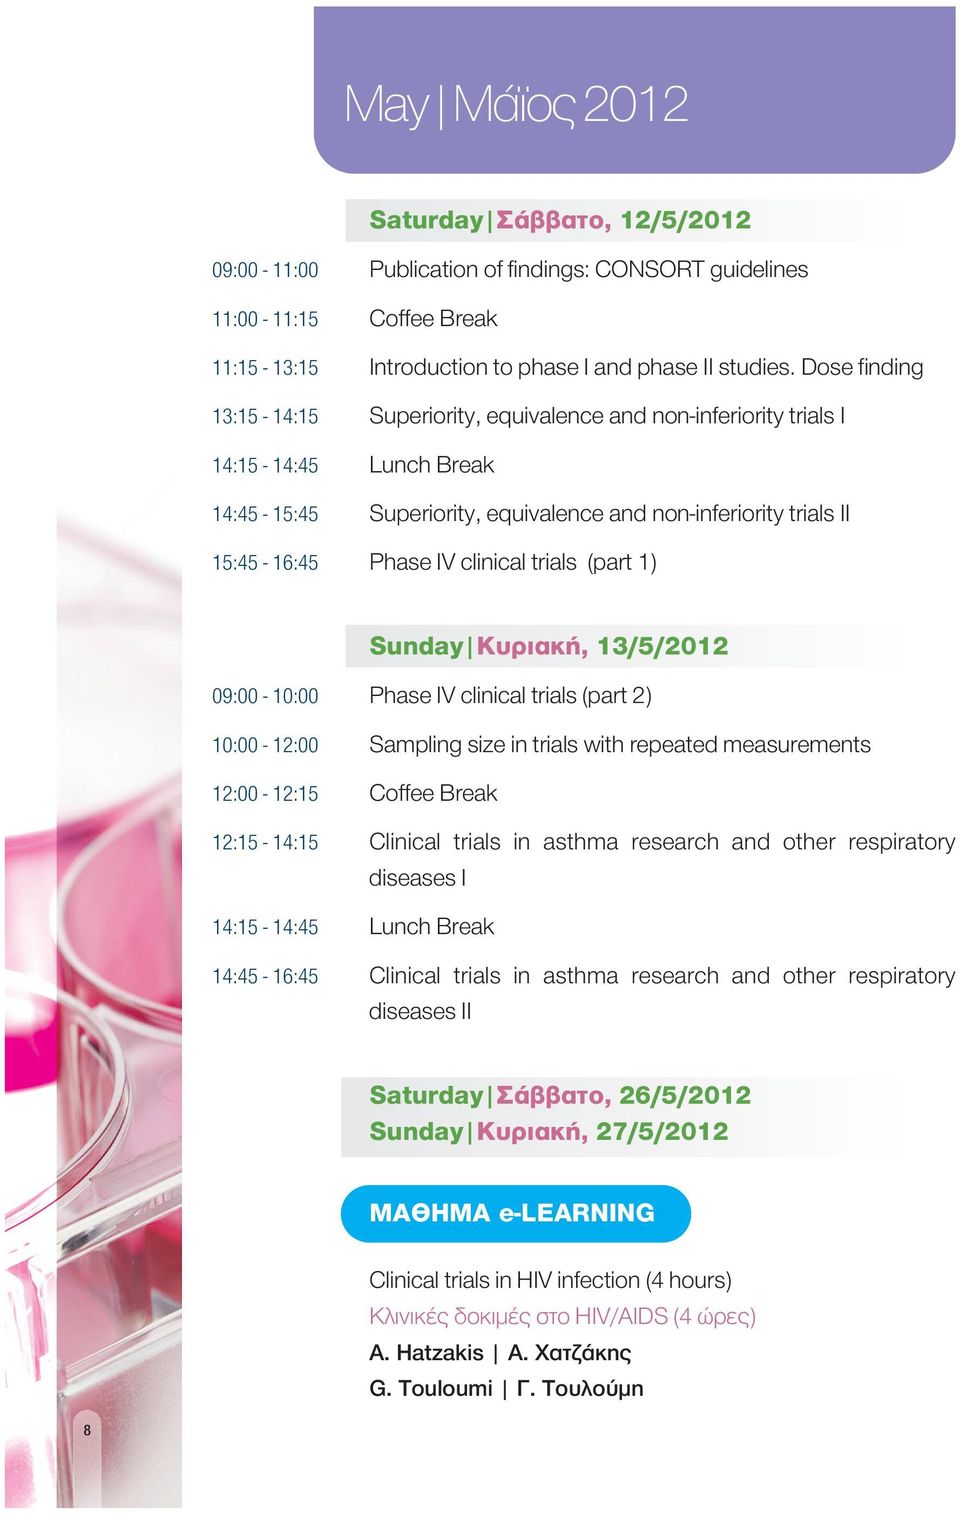 trials (part 1) Sunday Kυριακή, 13/5/2012 09:00-10:00 Phase IV clinical trials (part 2) 10:00-12:00 Sampling size in trials with repeated measurements 12:00-12:15 Coffee Break 12:15-14:15 Clinical